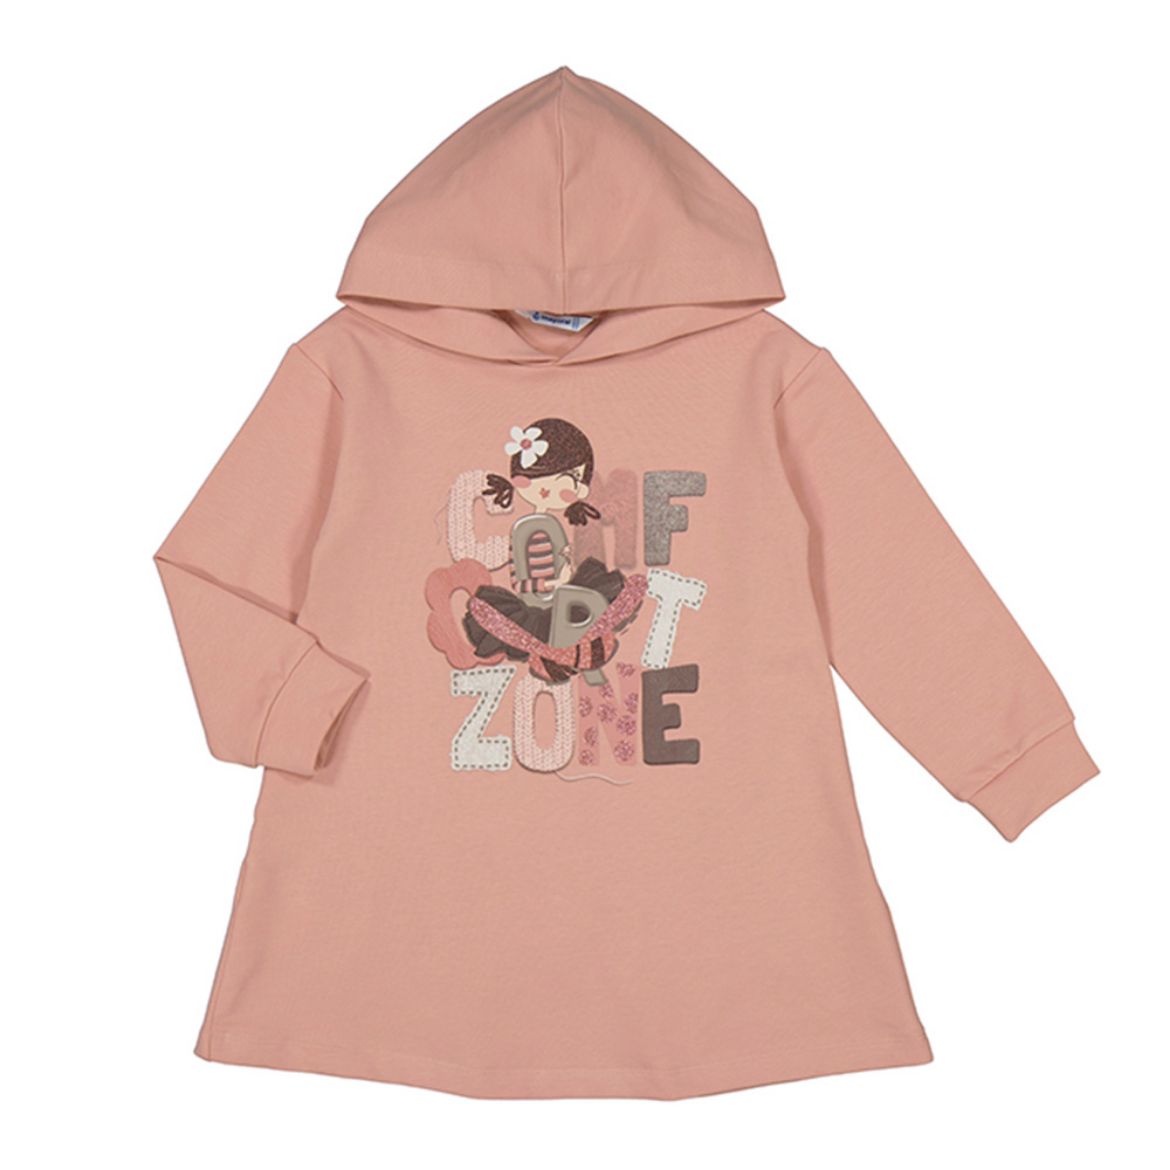 Picture of Mayoral Girls Nude 'Comfort Zone' Hooded Dress